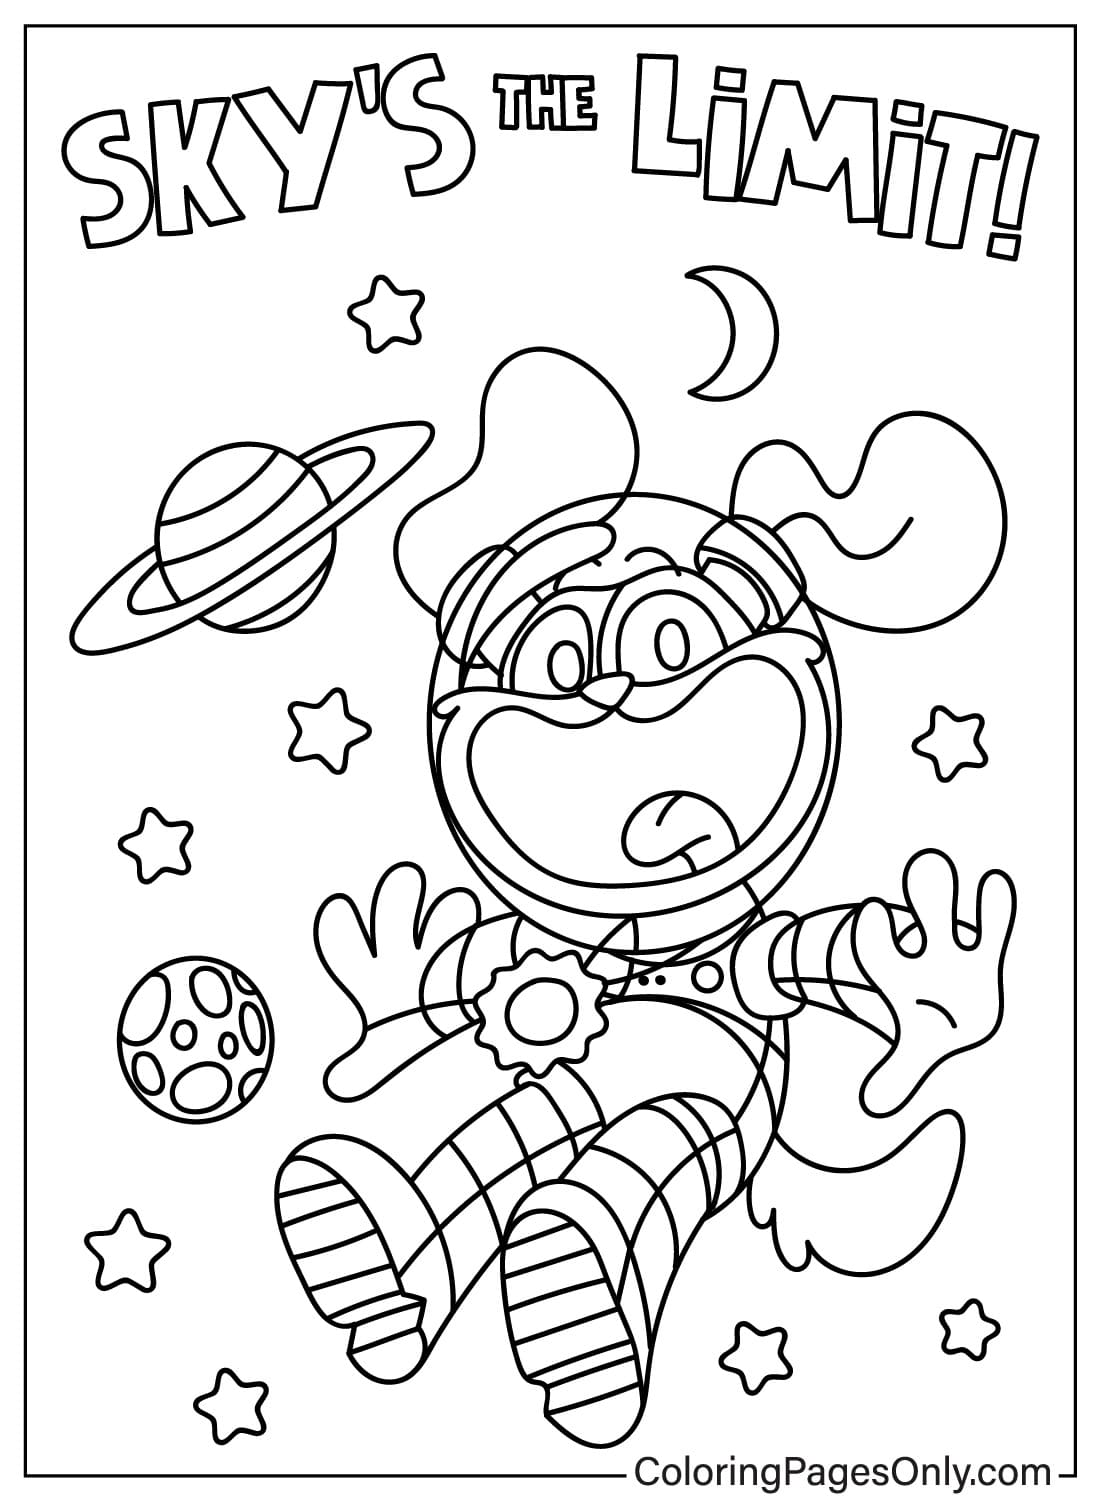 DogDay Images Coloring Page from DogDay